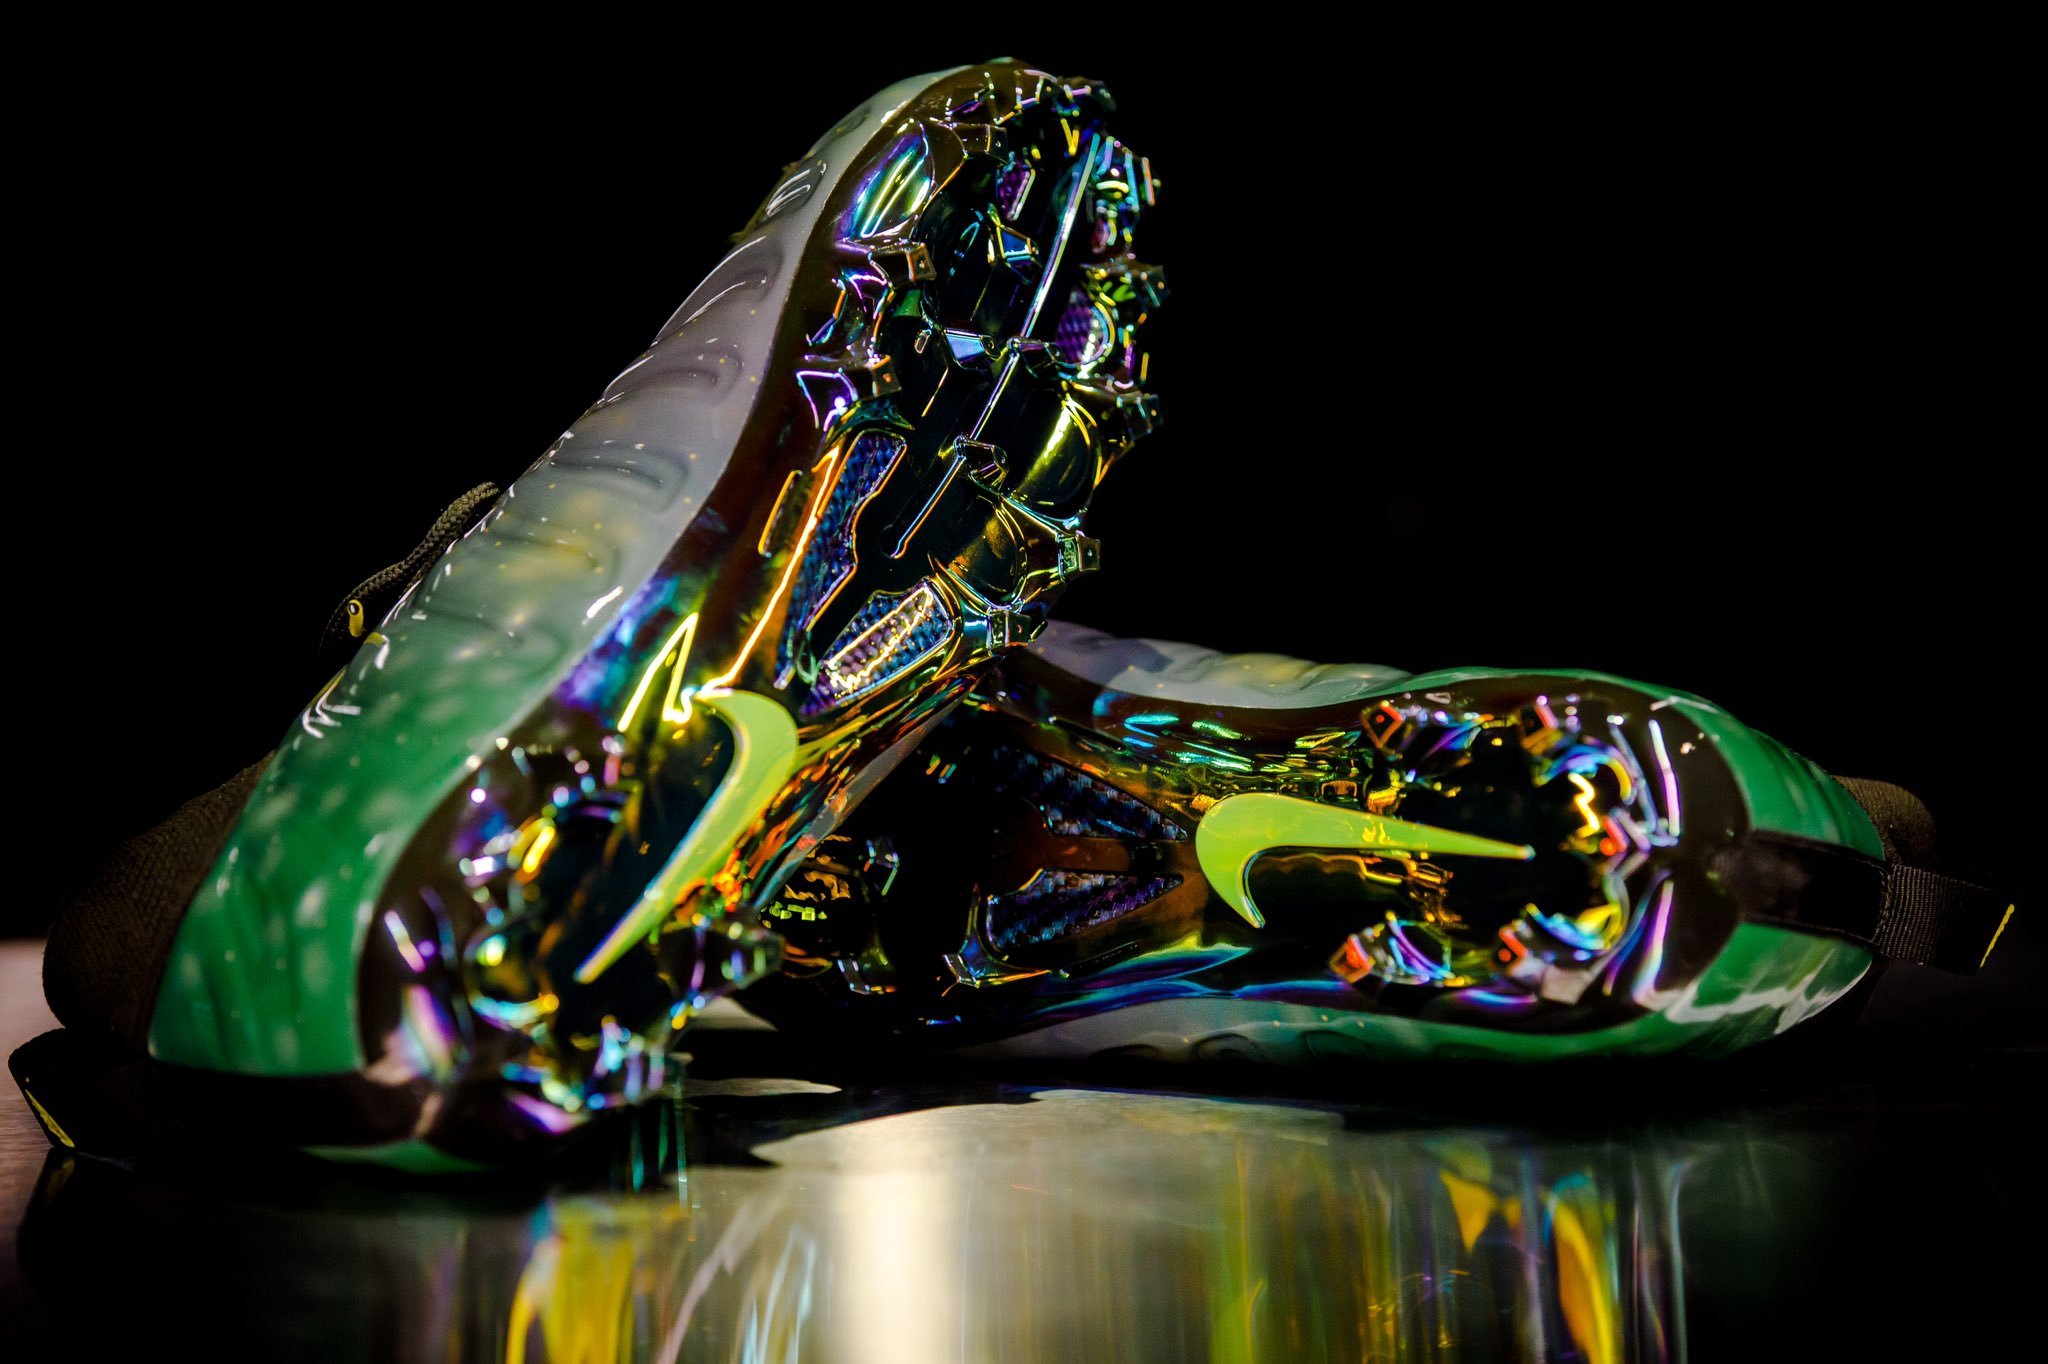 Oregon is set to wear exclusive color changing cleats - Footballscoop